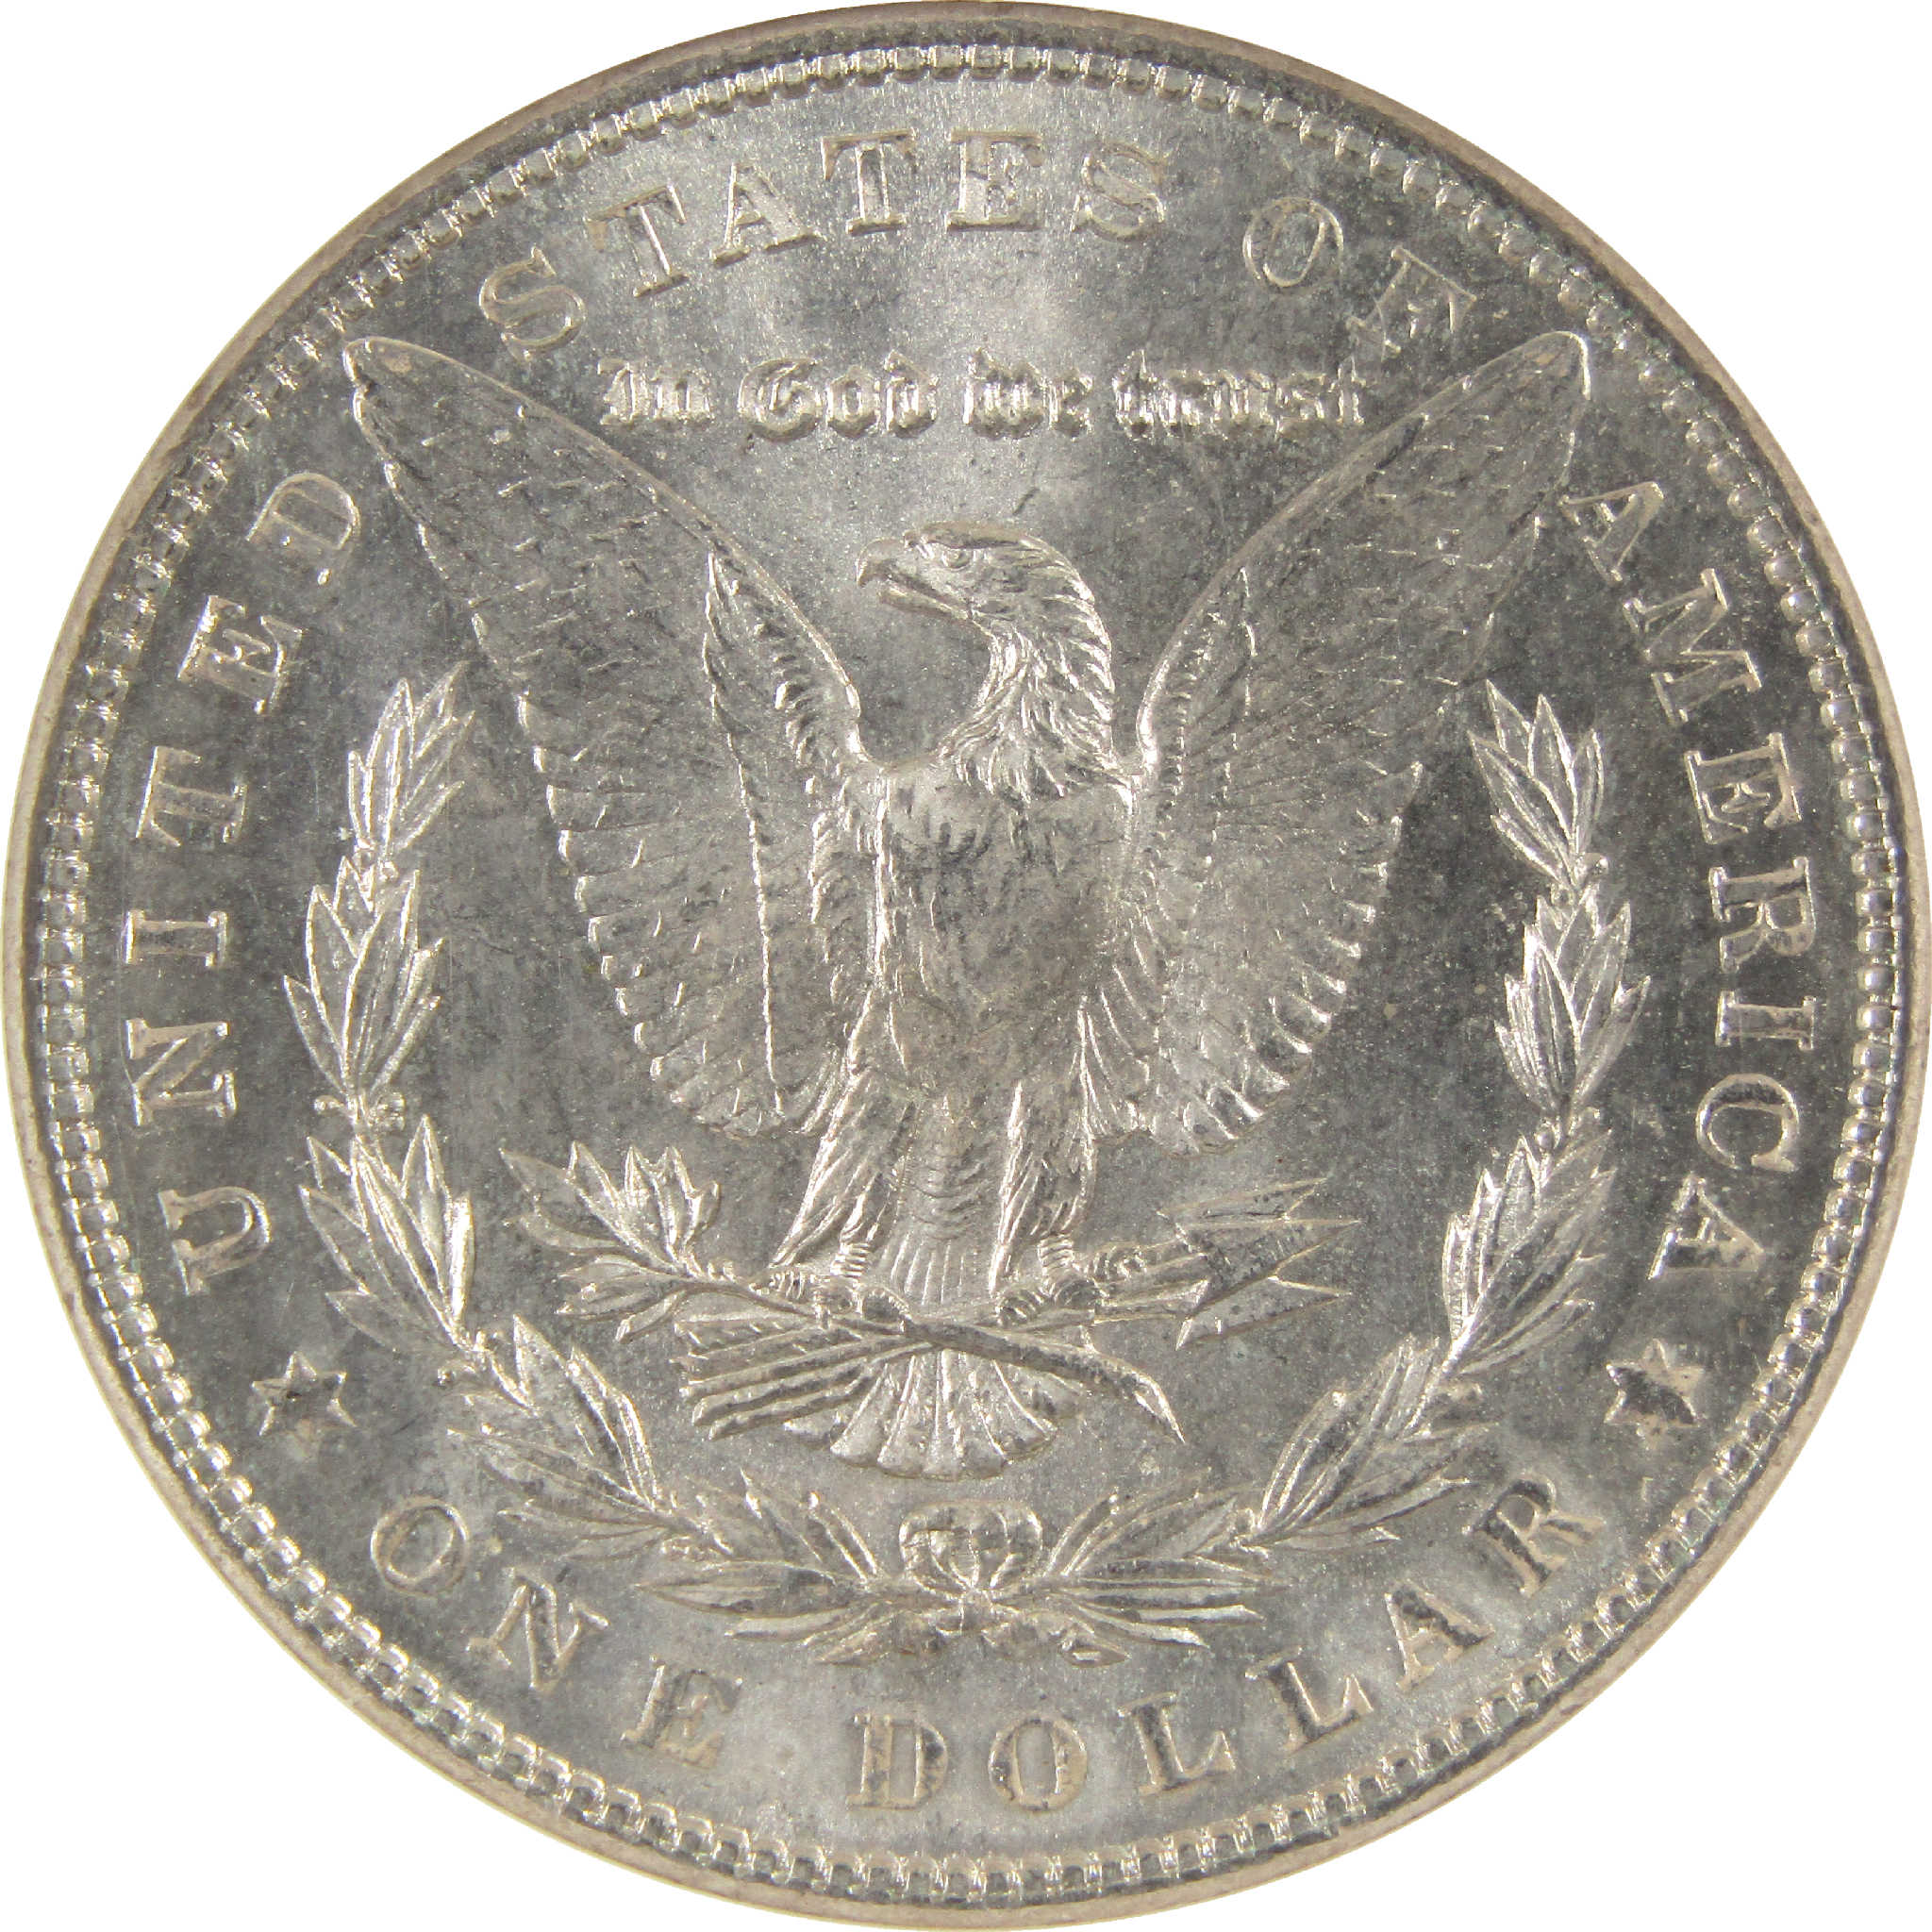 1903 Morgan Dollar MS 64 NGC Silver $1 Uncirculated Coin SKU:I11586 - Morgan coin - Morgan silver dollar - Morgan silver dollar for sale - Profile Coins &amp; Collectibles